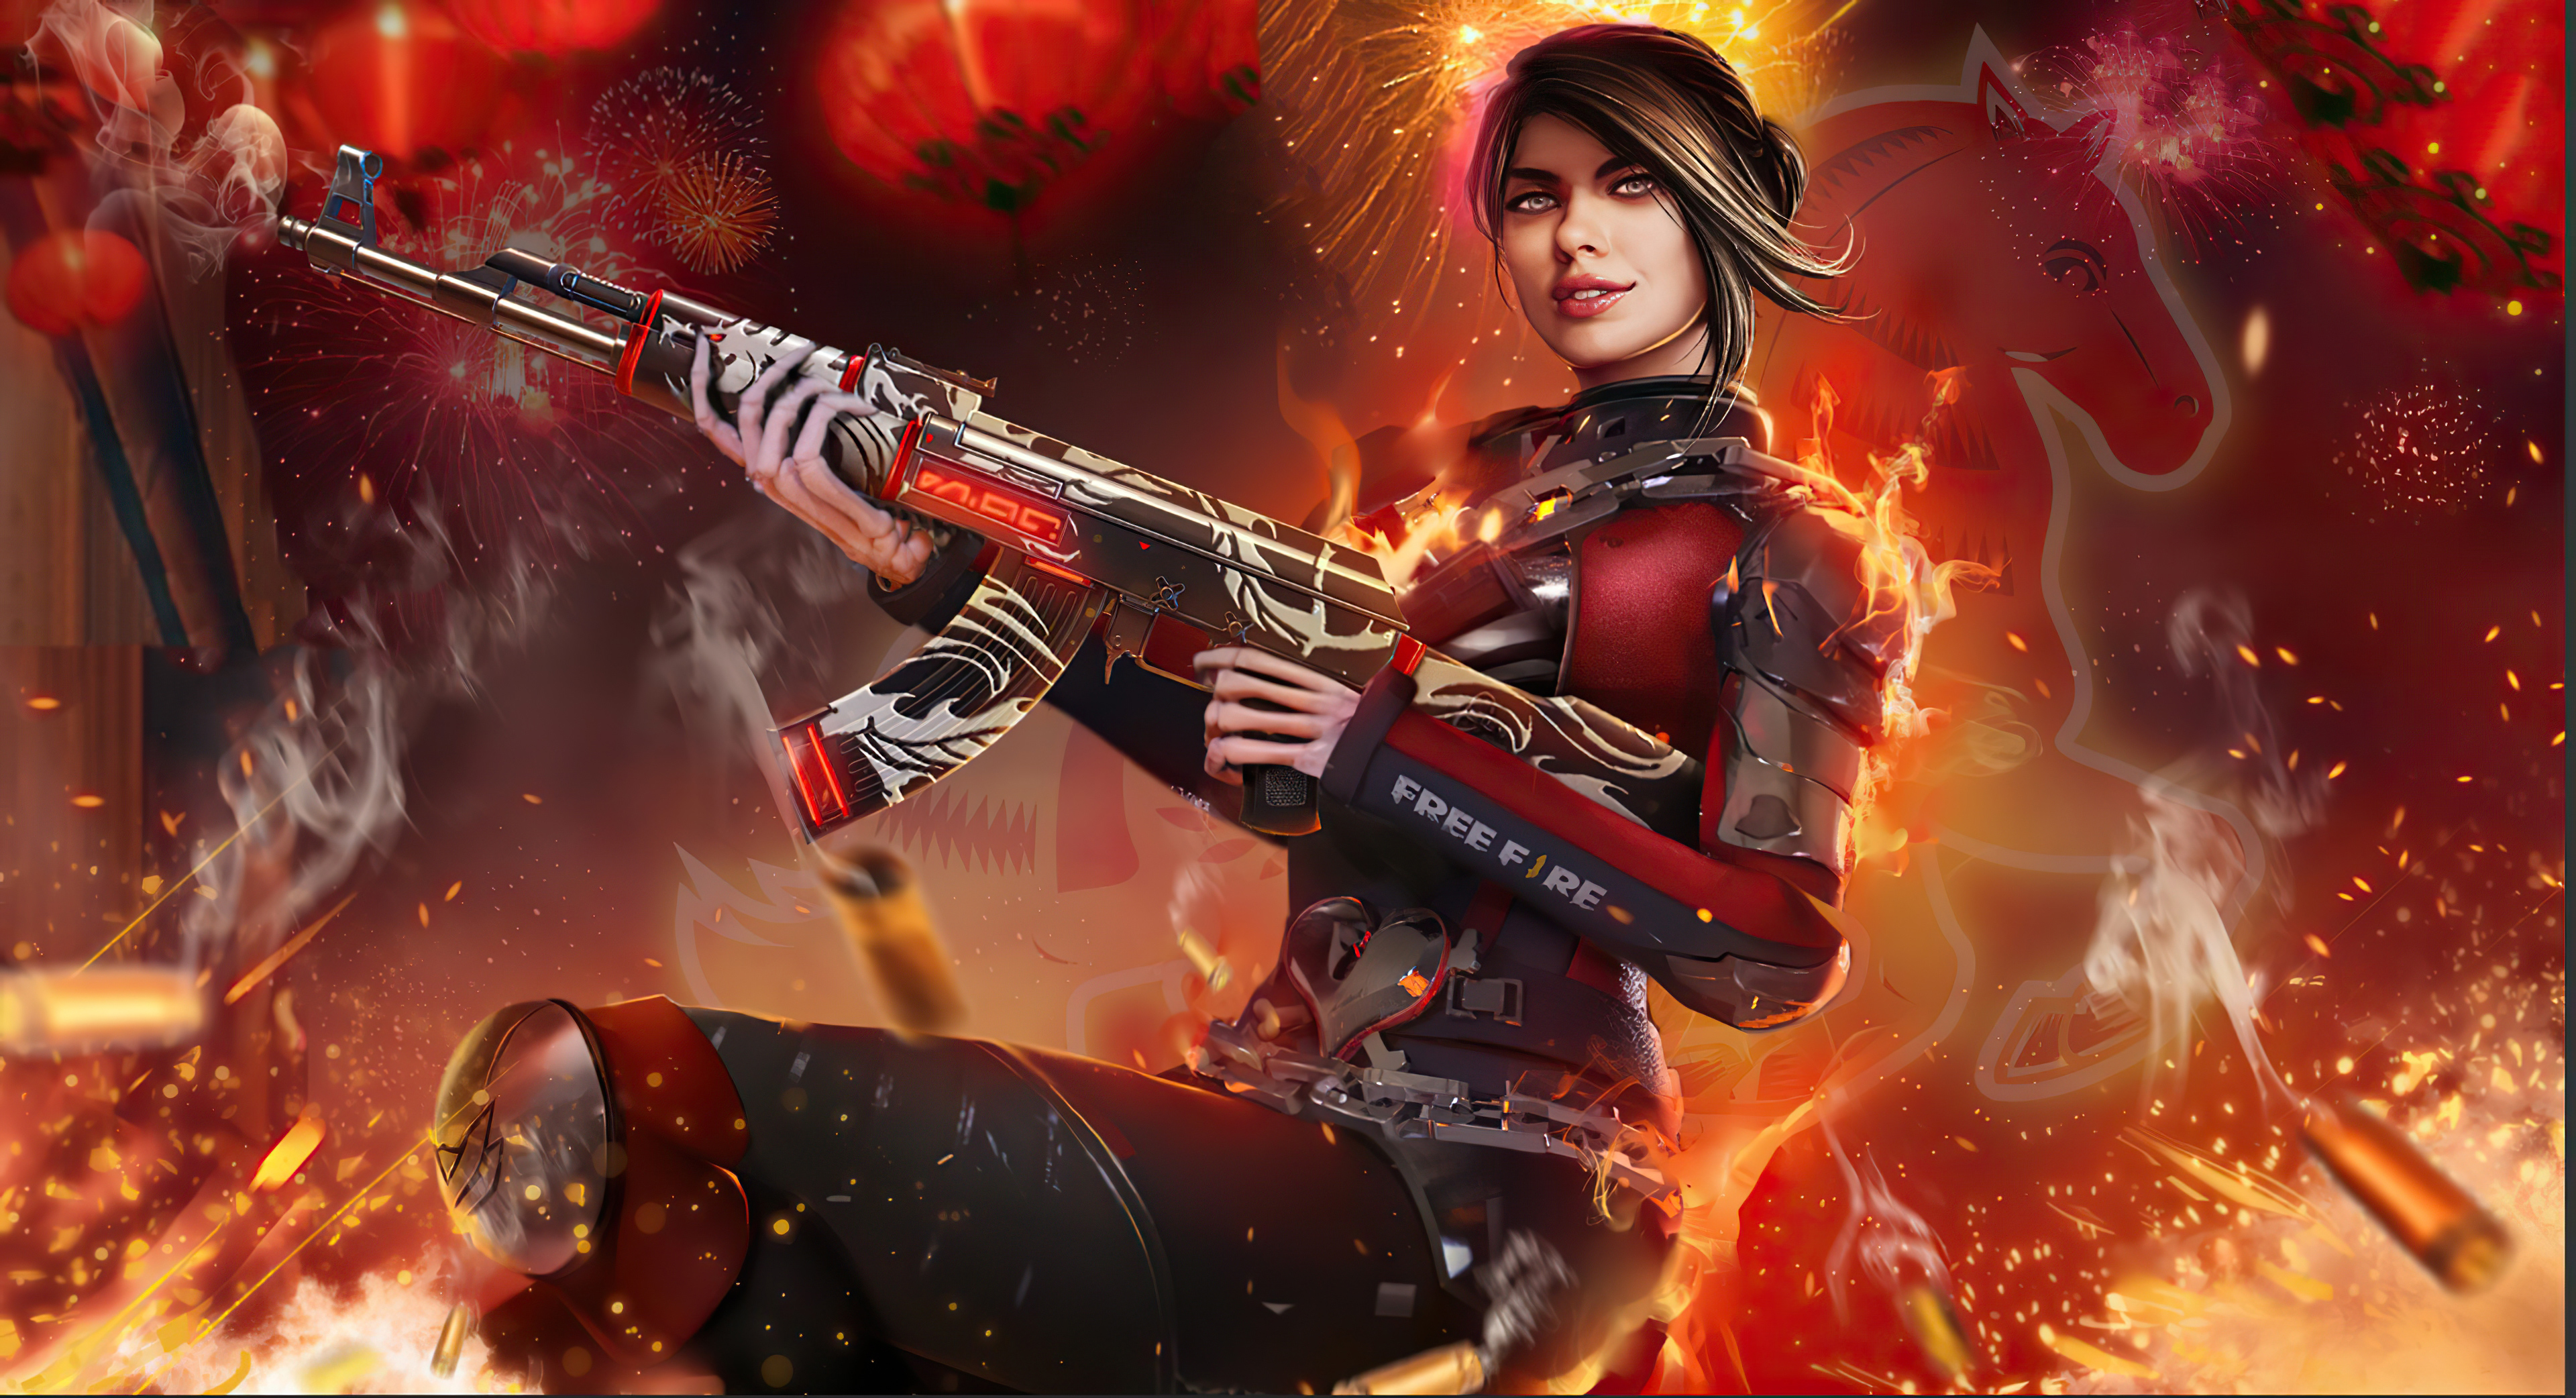 3840x2160202199 Garena Free Fire Sniper 3840x2160202199 Resolution Wallpaper,  HD Games 4K Wallpapers, Images, Photos and Background - Wallpapers Den